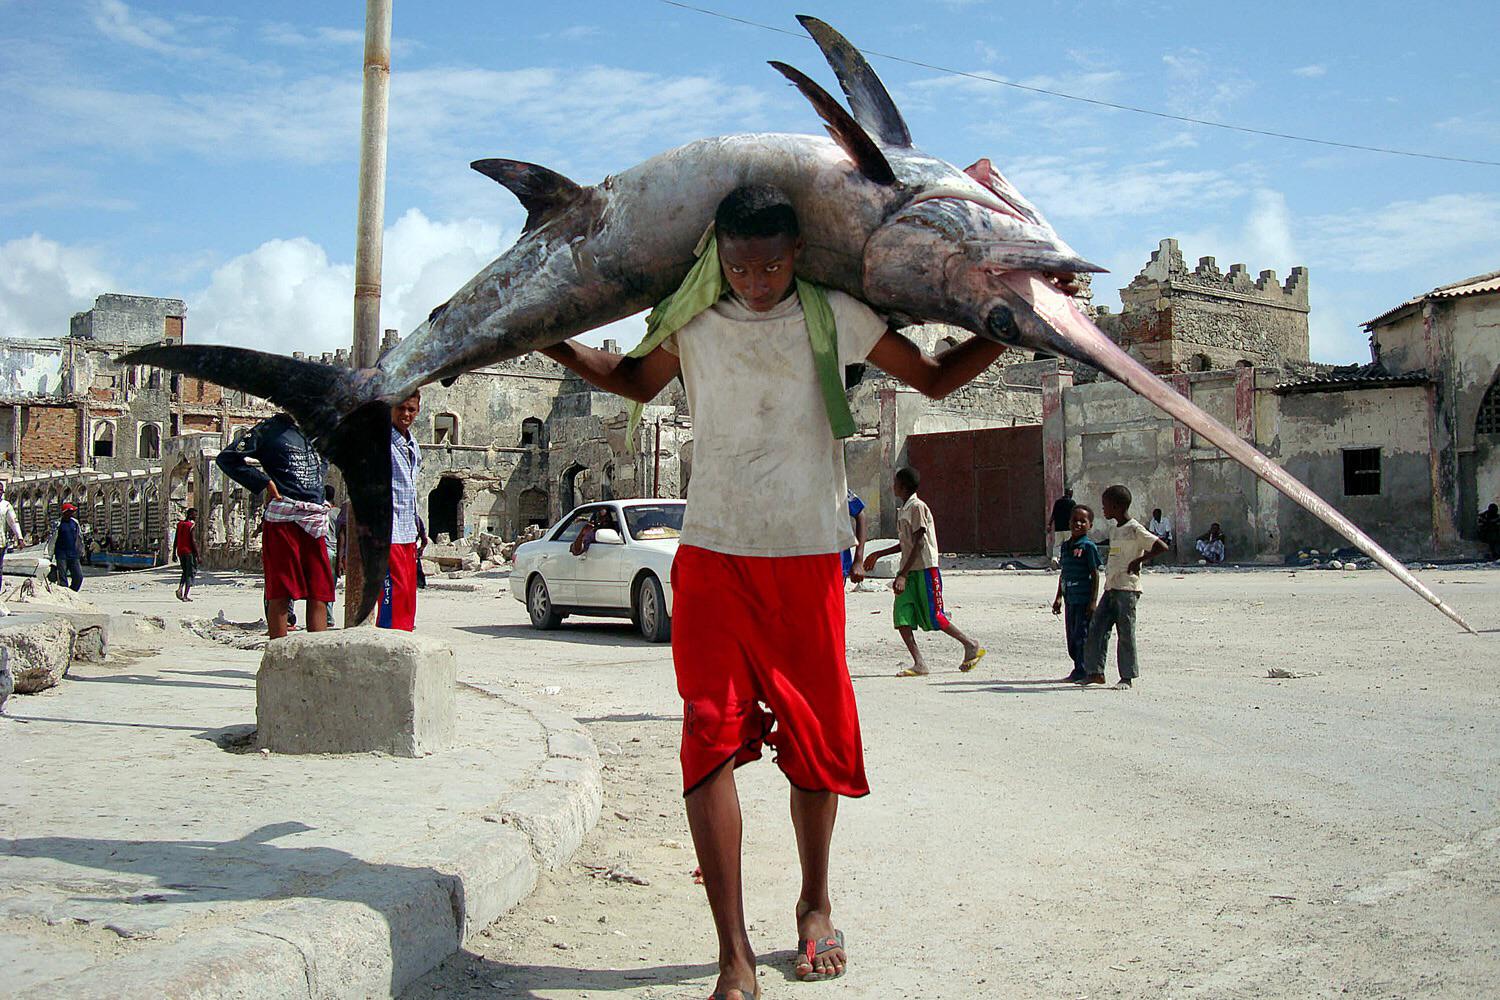 A Somali fisherman with his prize.